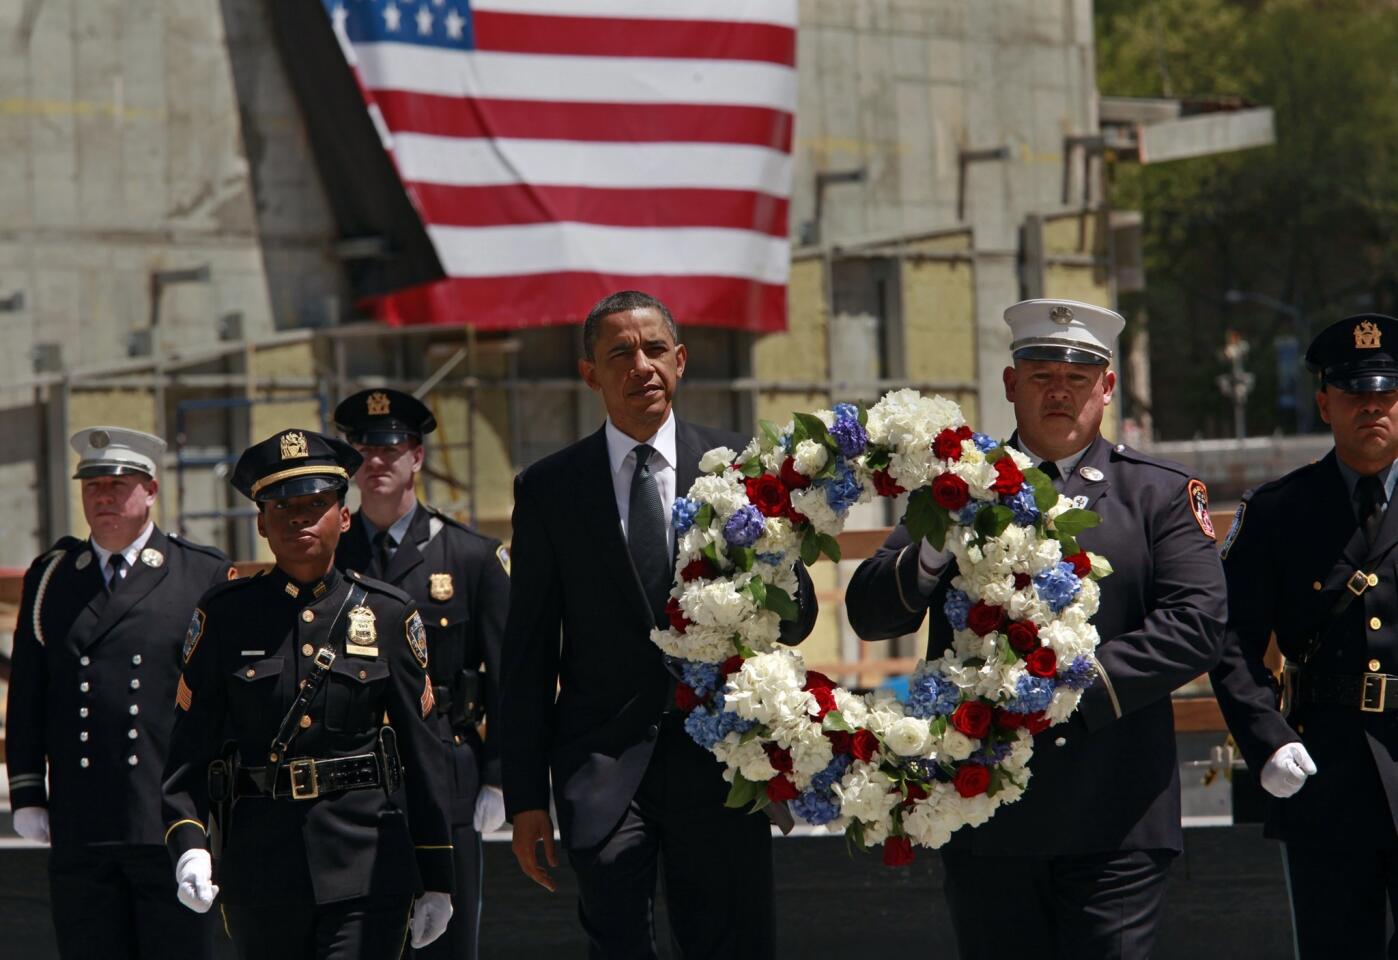 President Obama visits the site of the World Trade Center